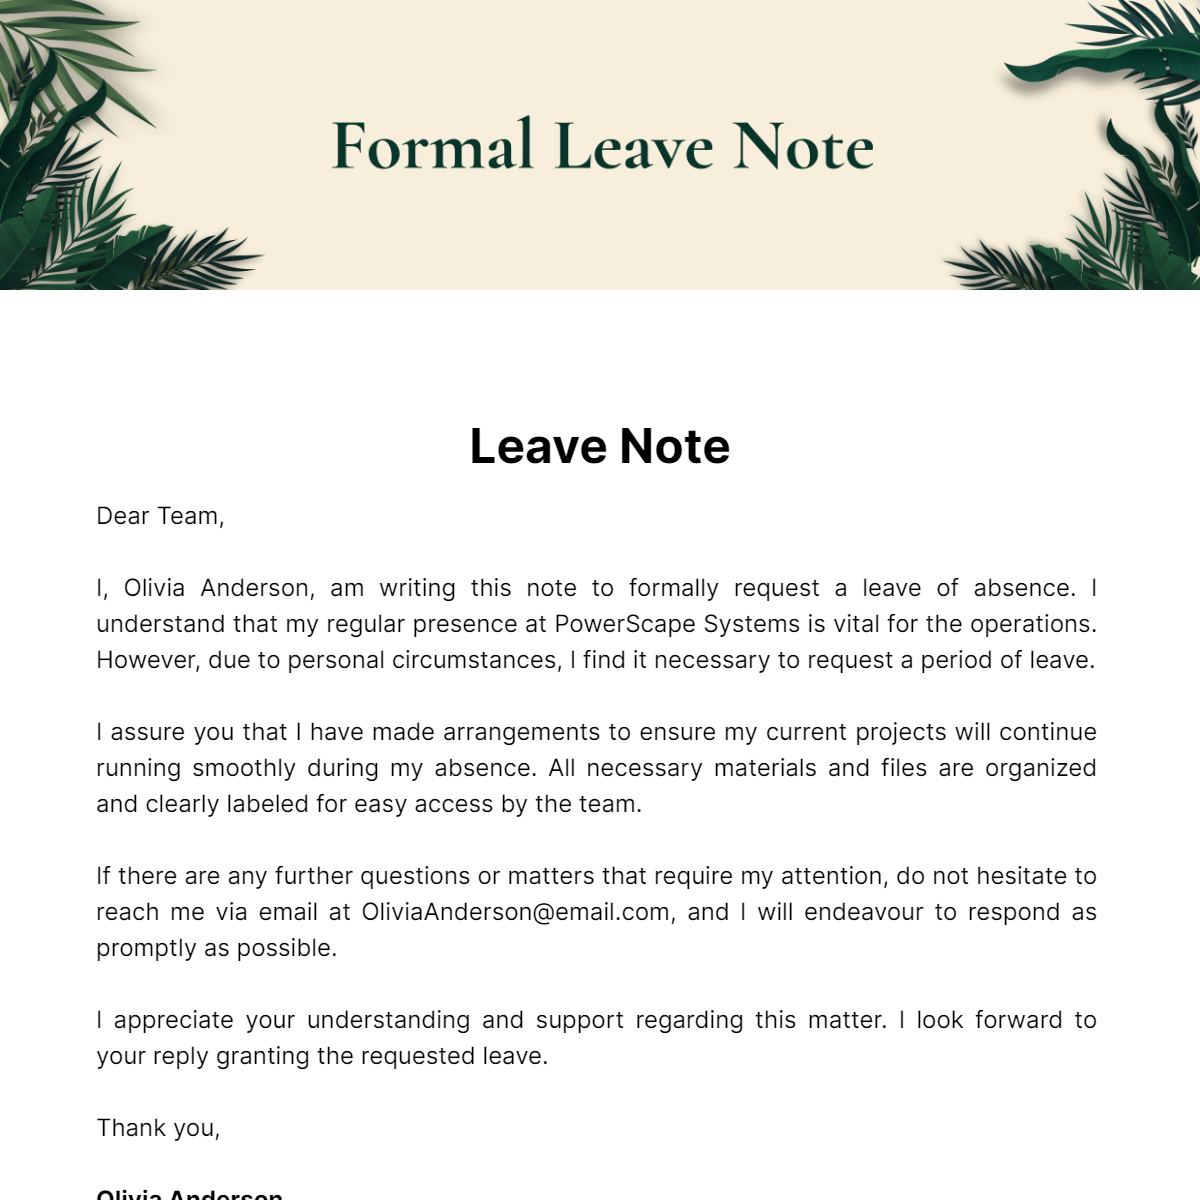 Formal Leave Note Template